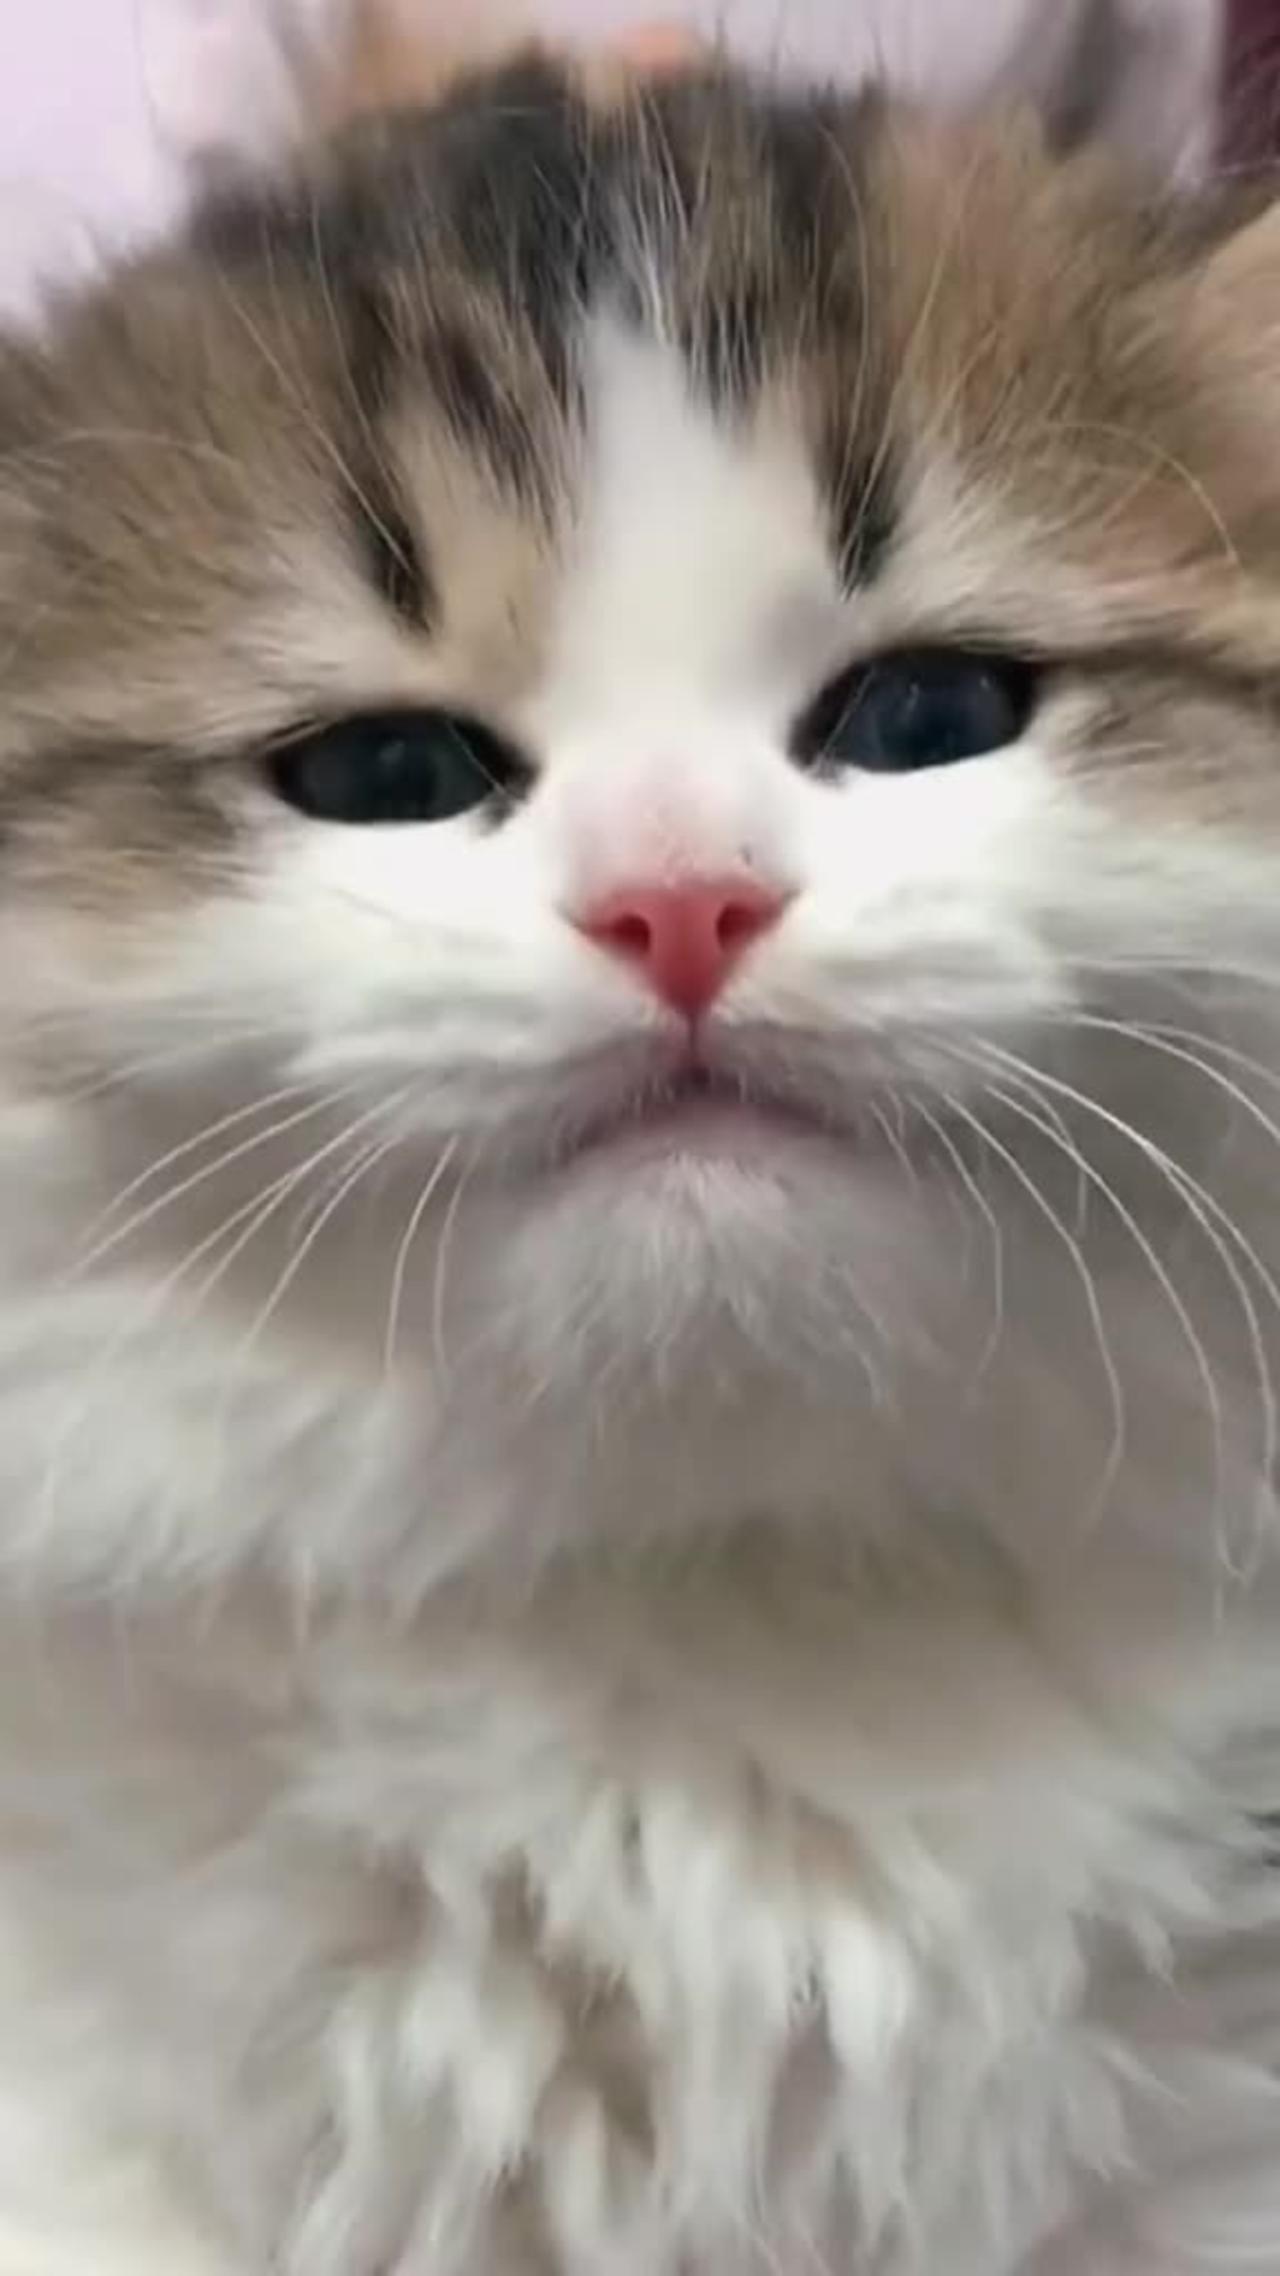 "Adorable Kitten Meows for Attention"